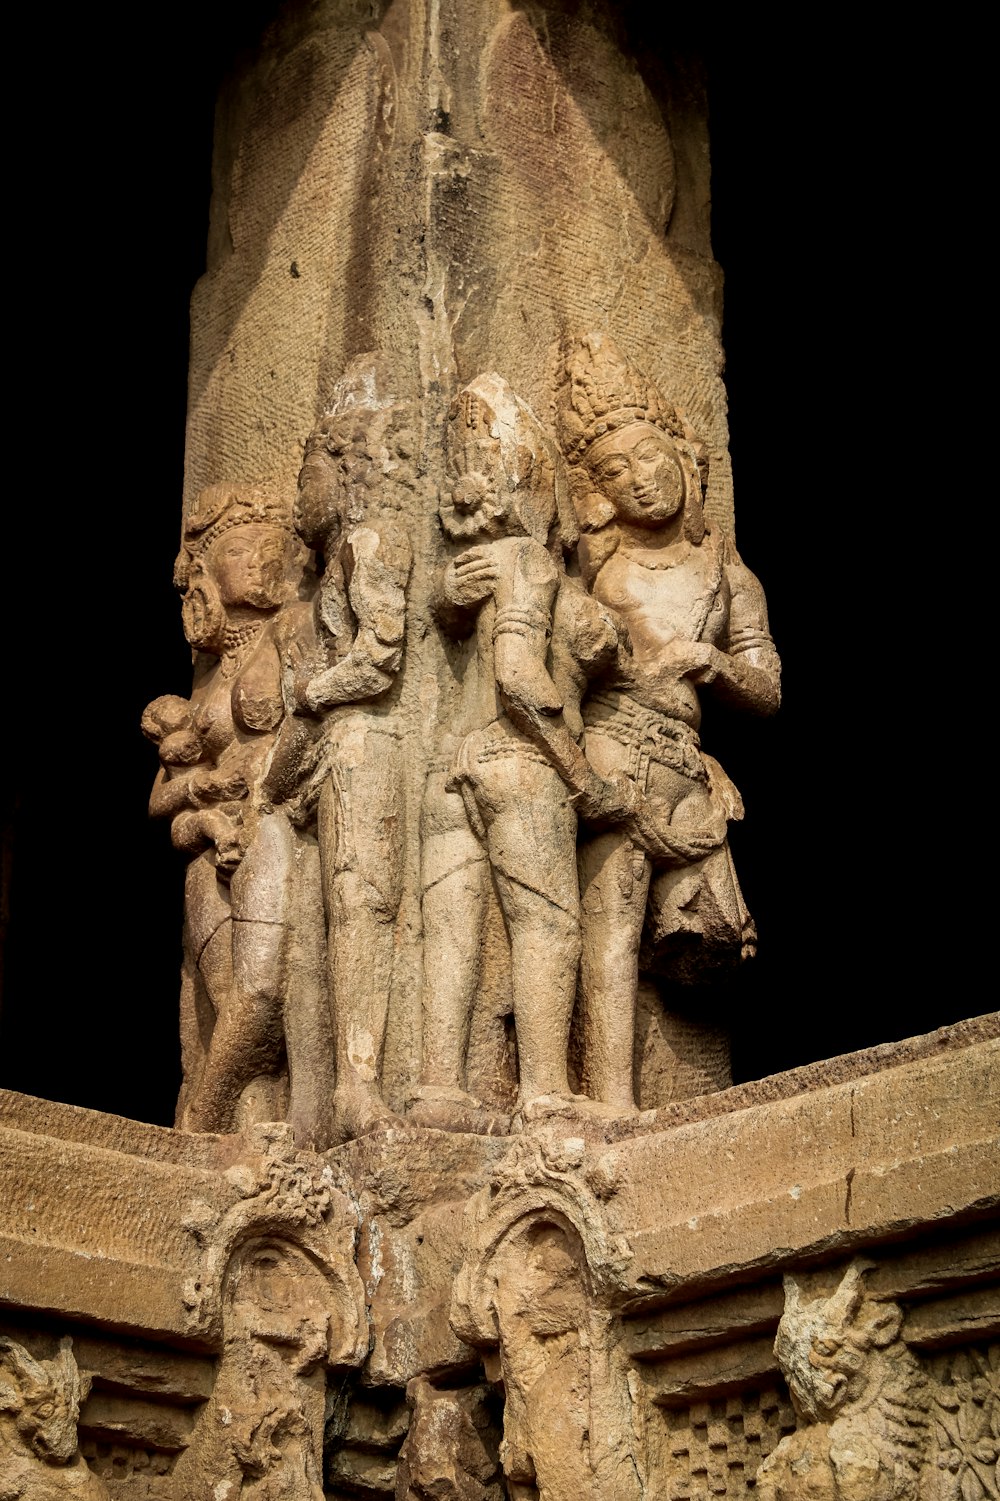 a statue of a group of people standing next to each other